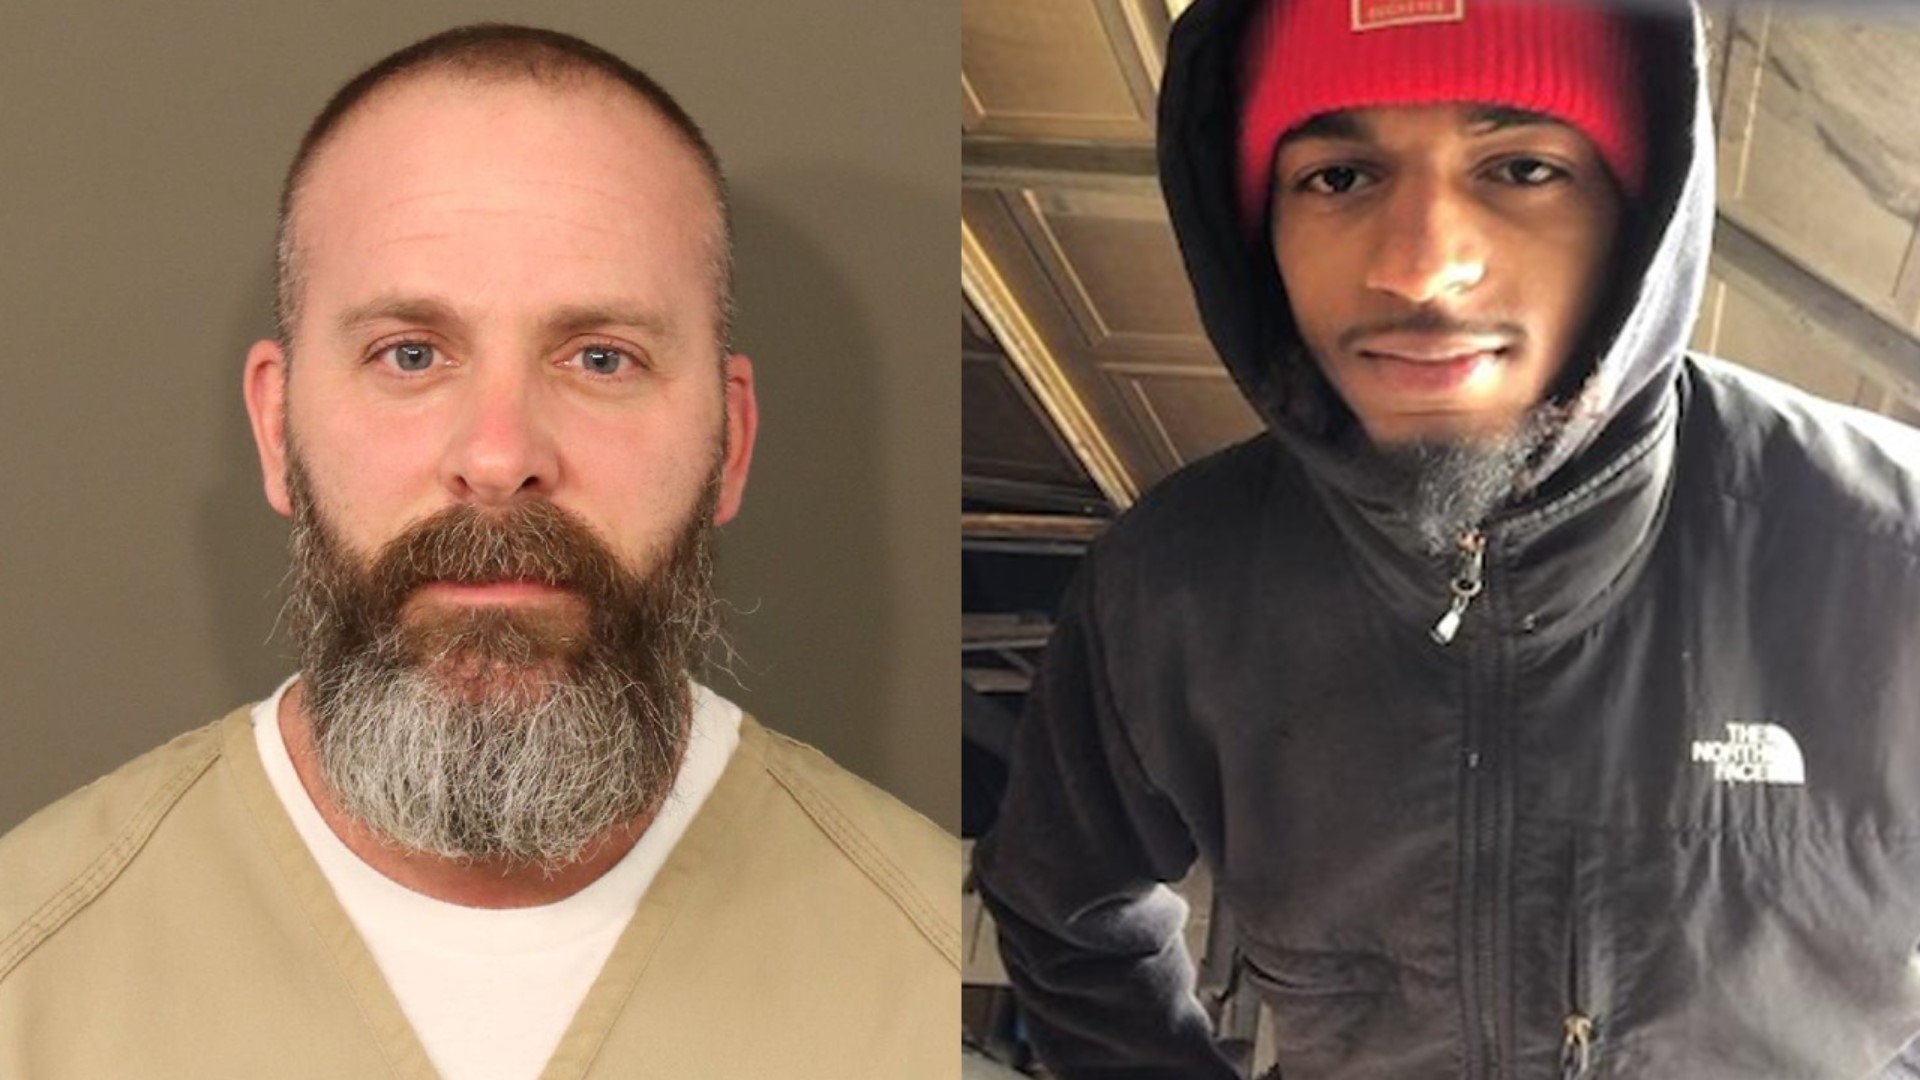 Former Franklin County Sheriff's deputy Jason Meade is facing murder charges for the shooting death of Casey Goodson Jr.